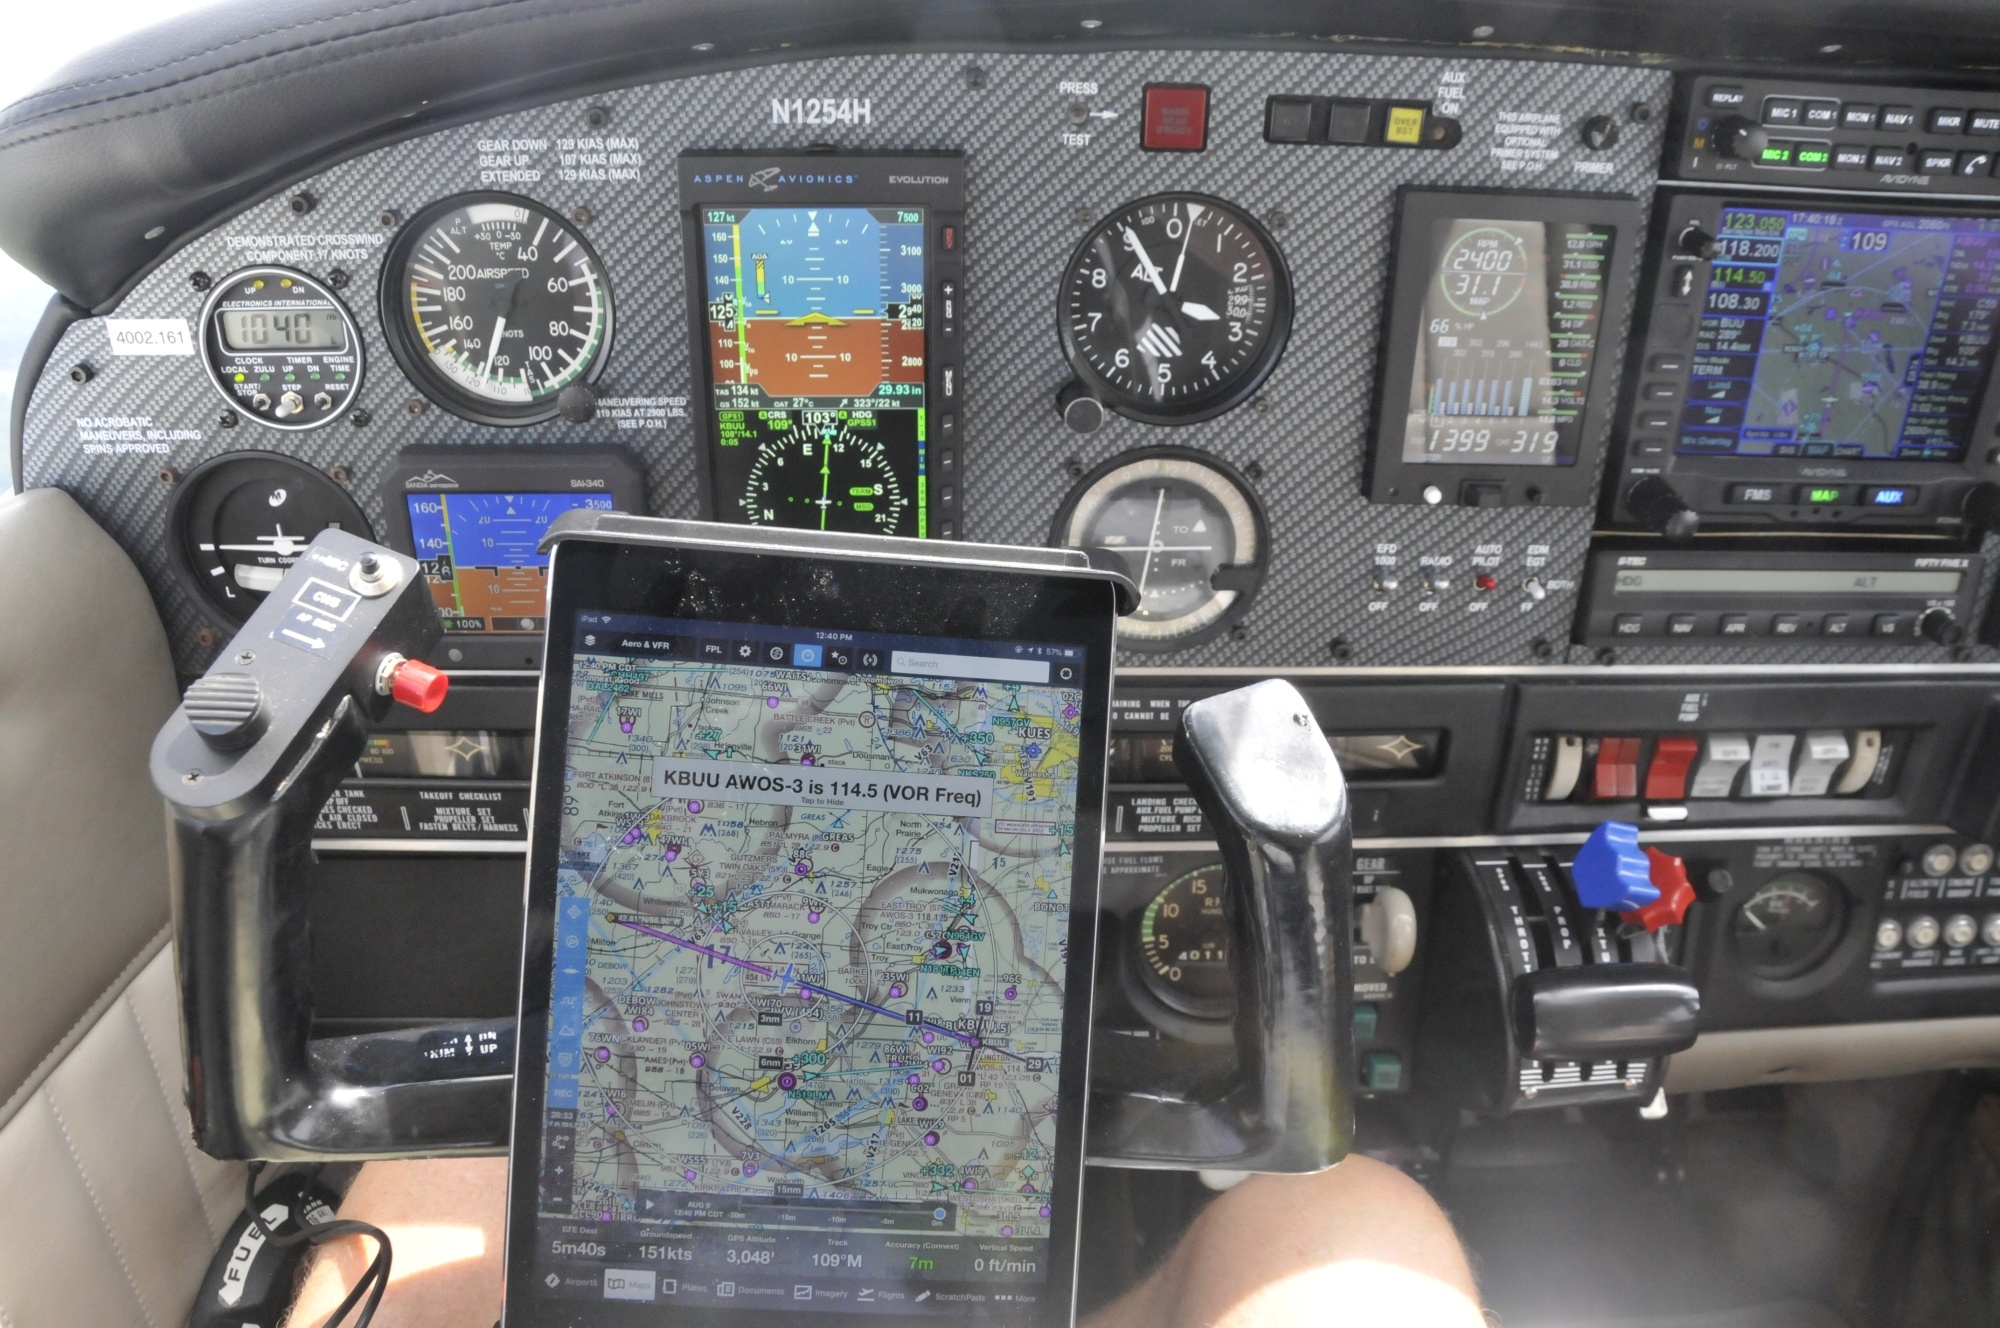 How to mount and use your iPhone as an EFB in the cockpit - iPad